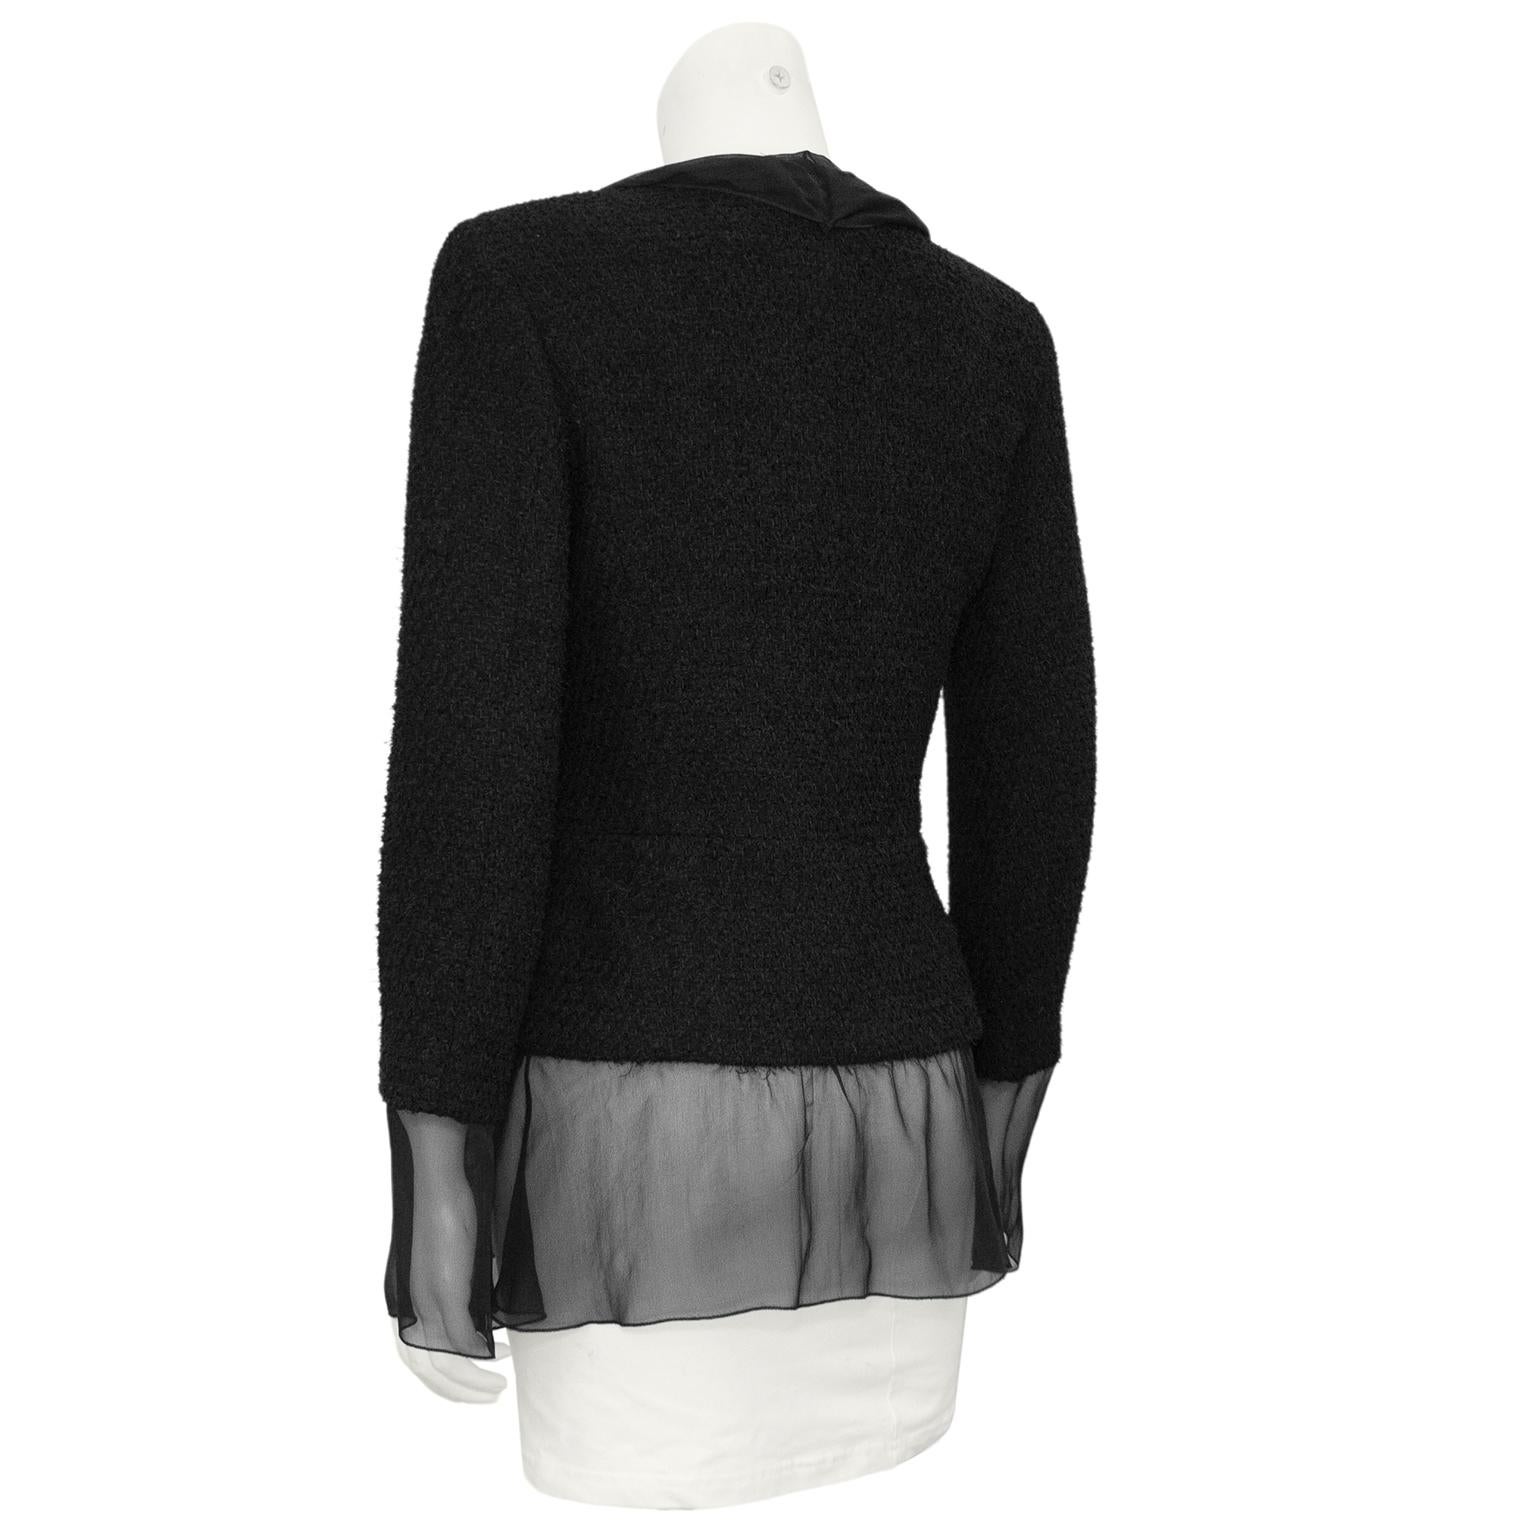 2000 Chanel Black Boucle and Chiffon Blazer In Good Condition For Sale In Toronto, Ontario